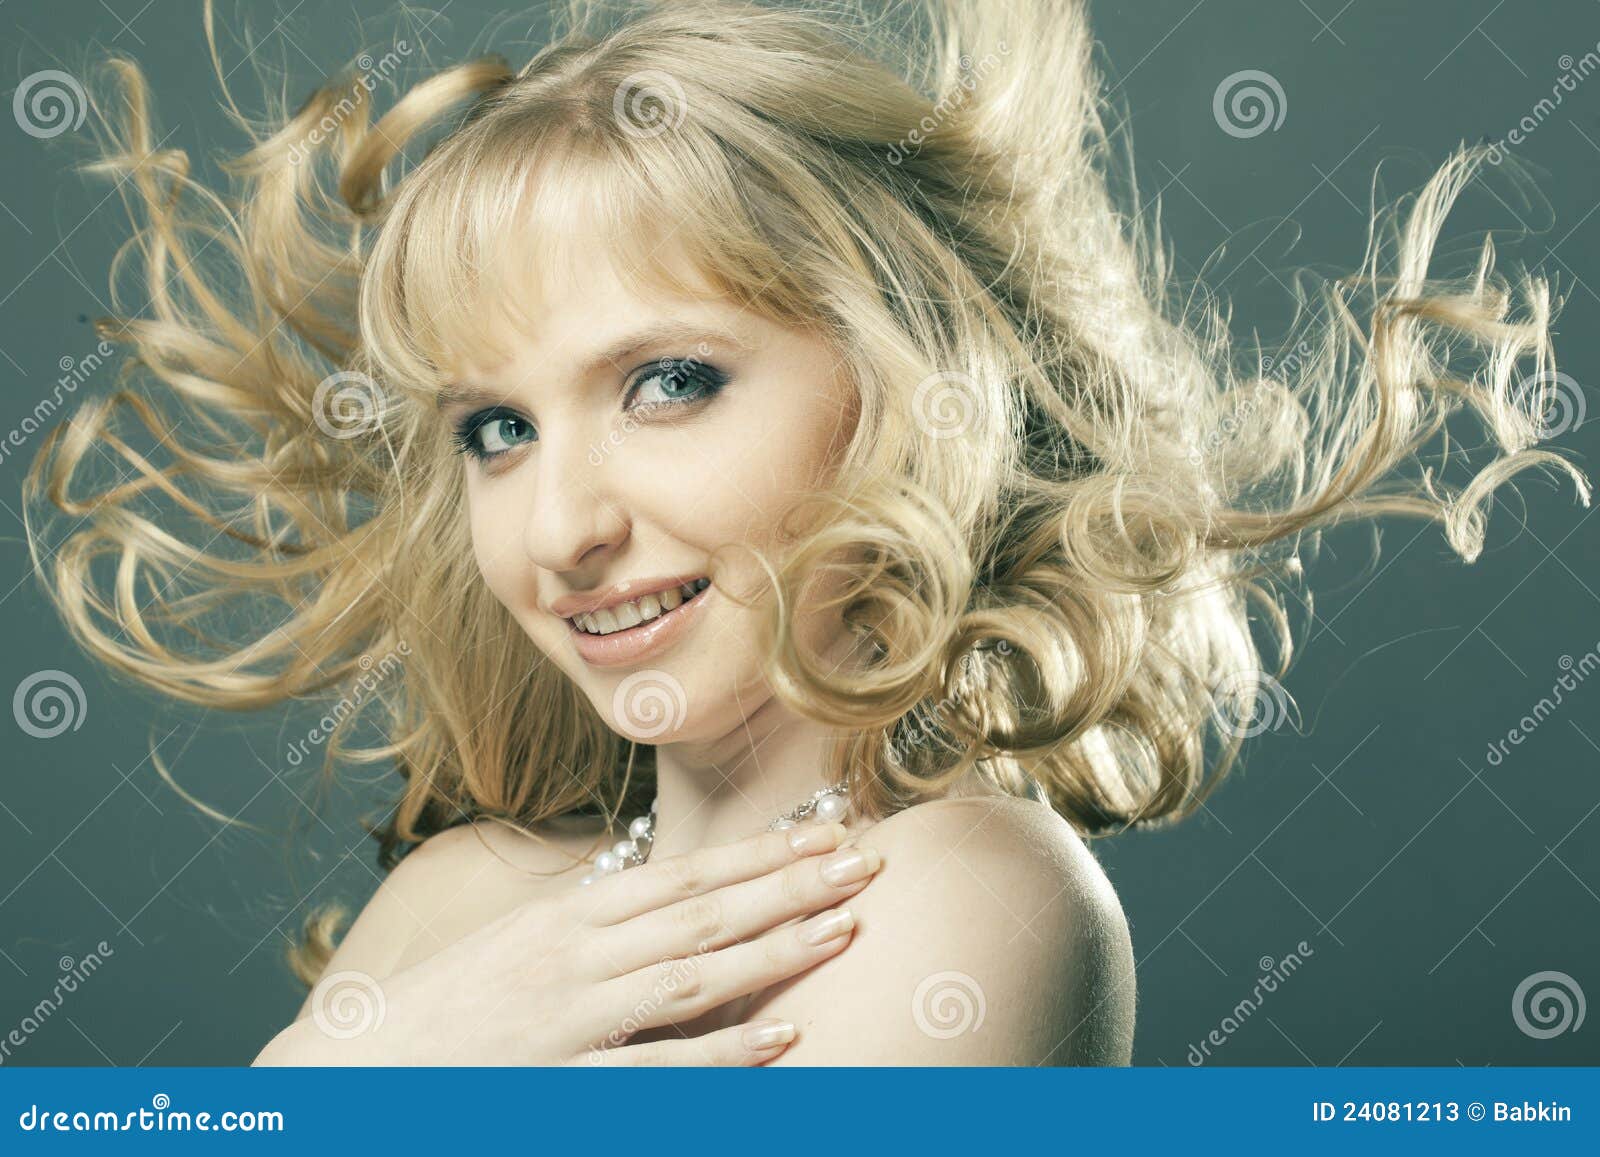 4. Blonde Hair Girl Images, Stock Photos & Vectors - wide 9